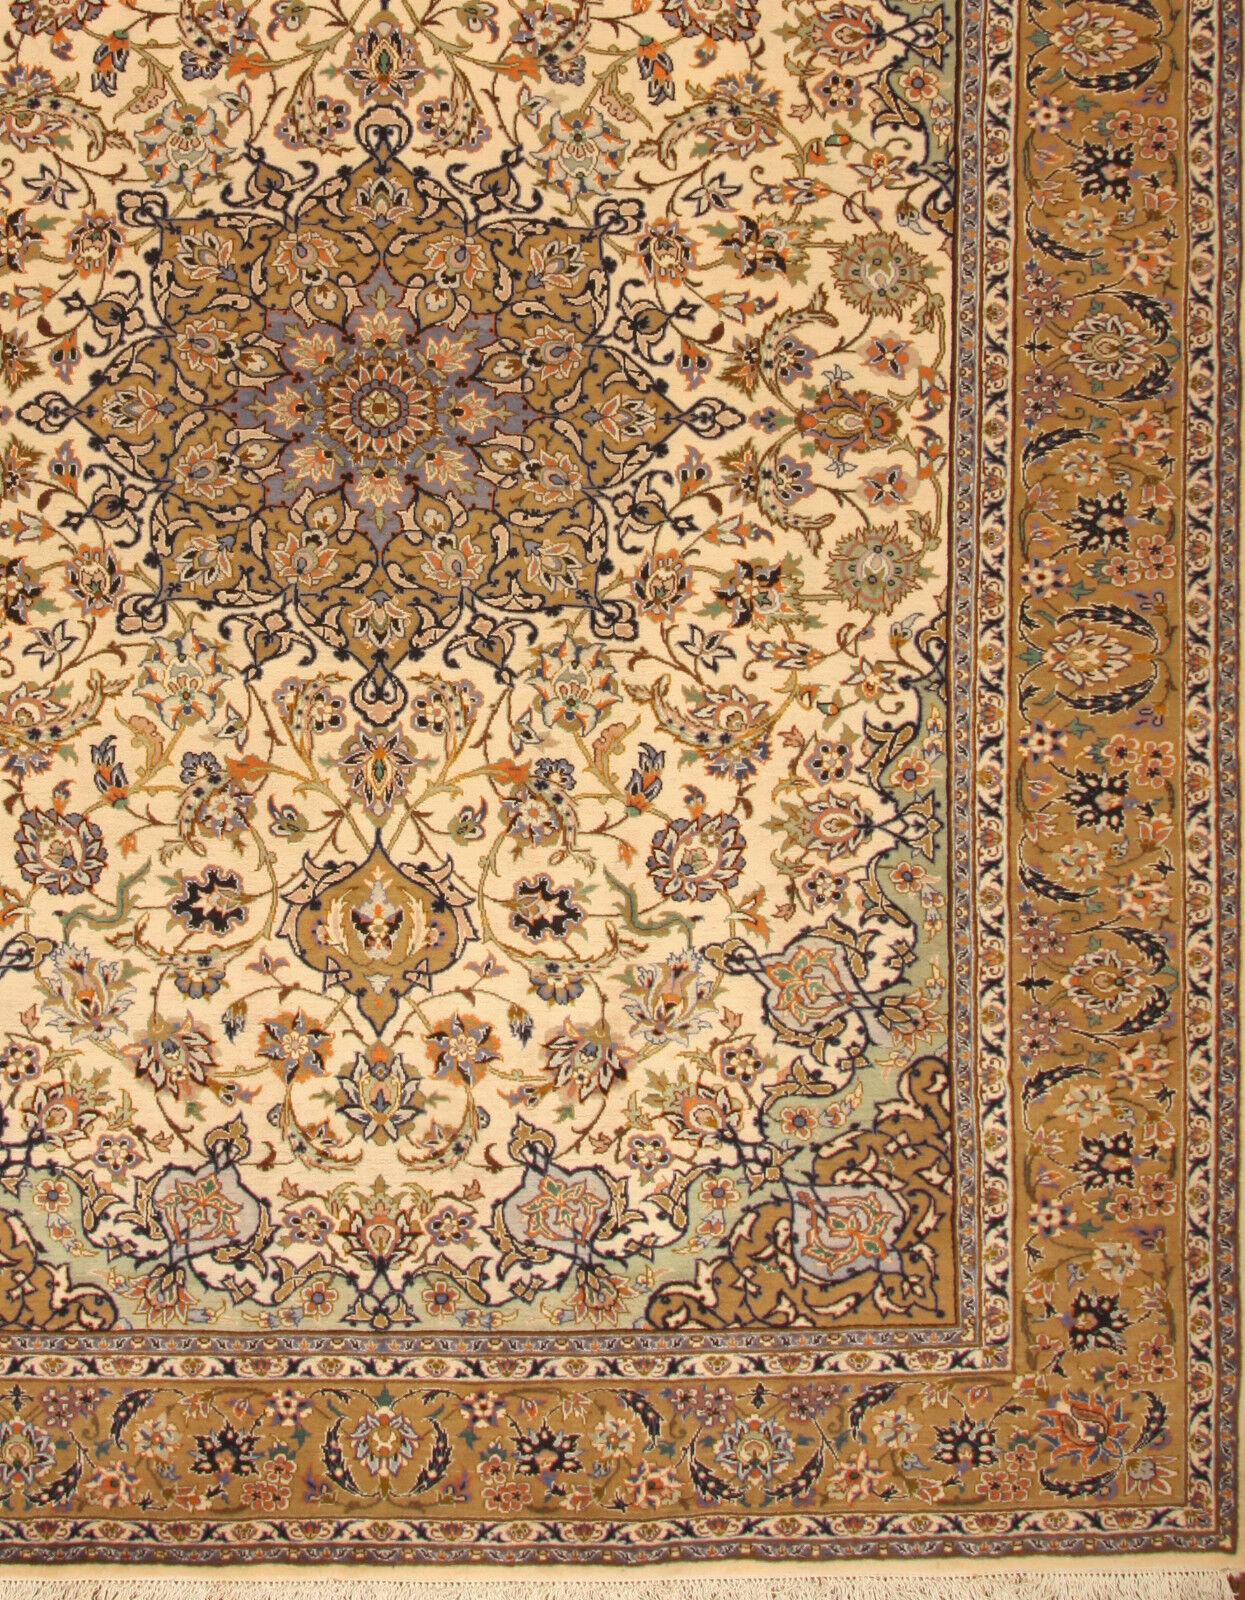 Overhead shot of the Handmade Contemporary Persian Isfahan Rug displaying size and dimensions